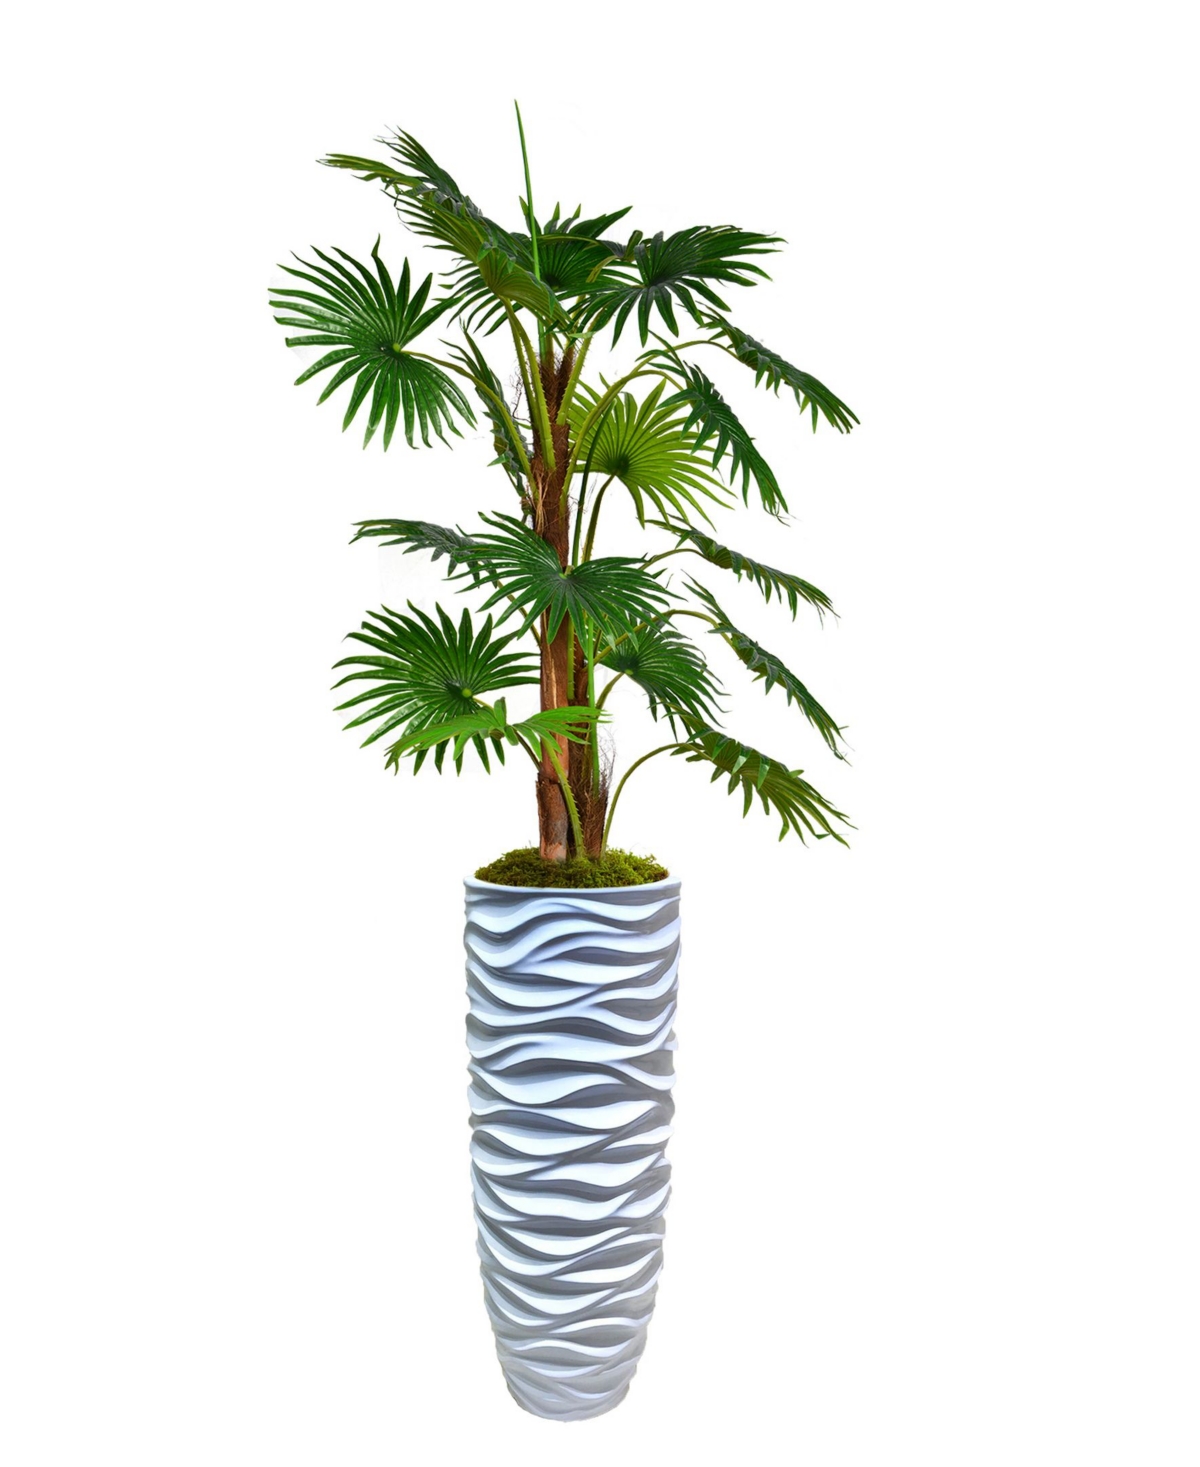 70" Tall Fan Palm Tree Faux decor with Burlap Kit in Resin Planter - White